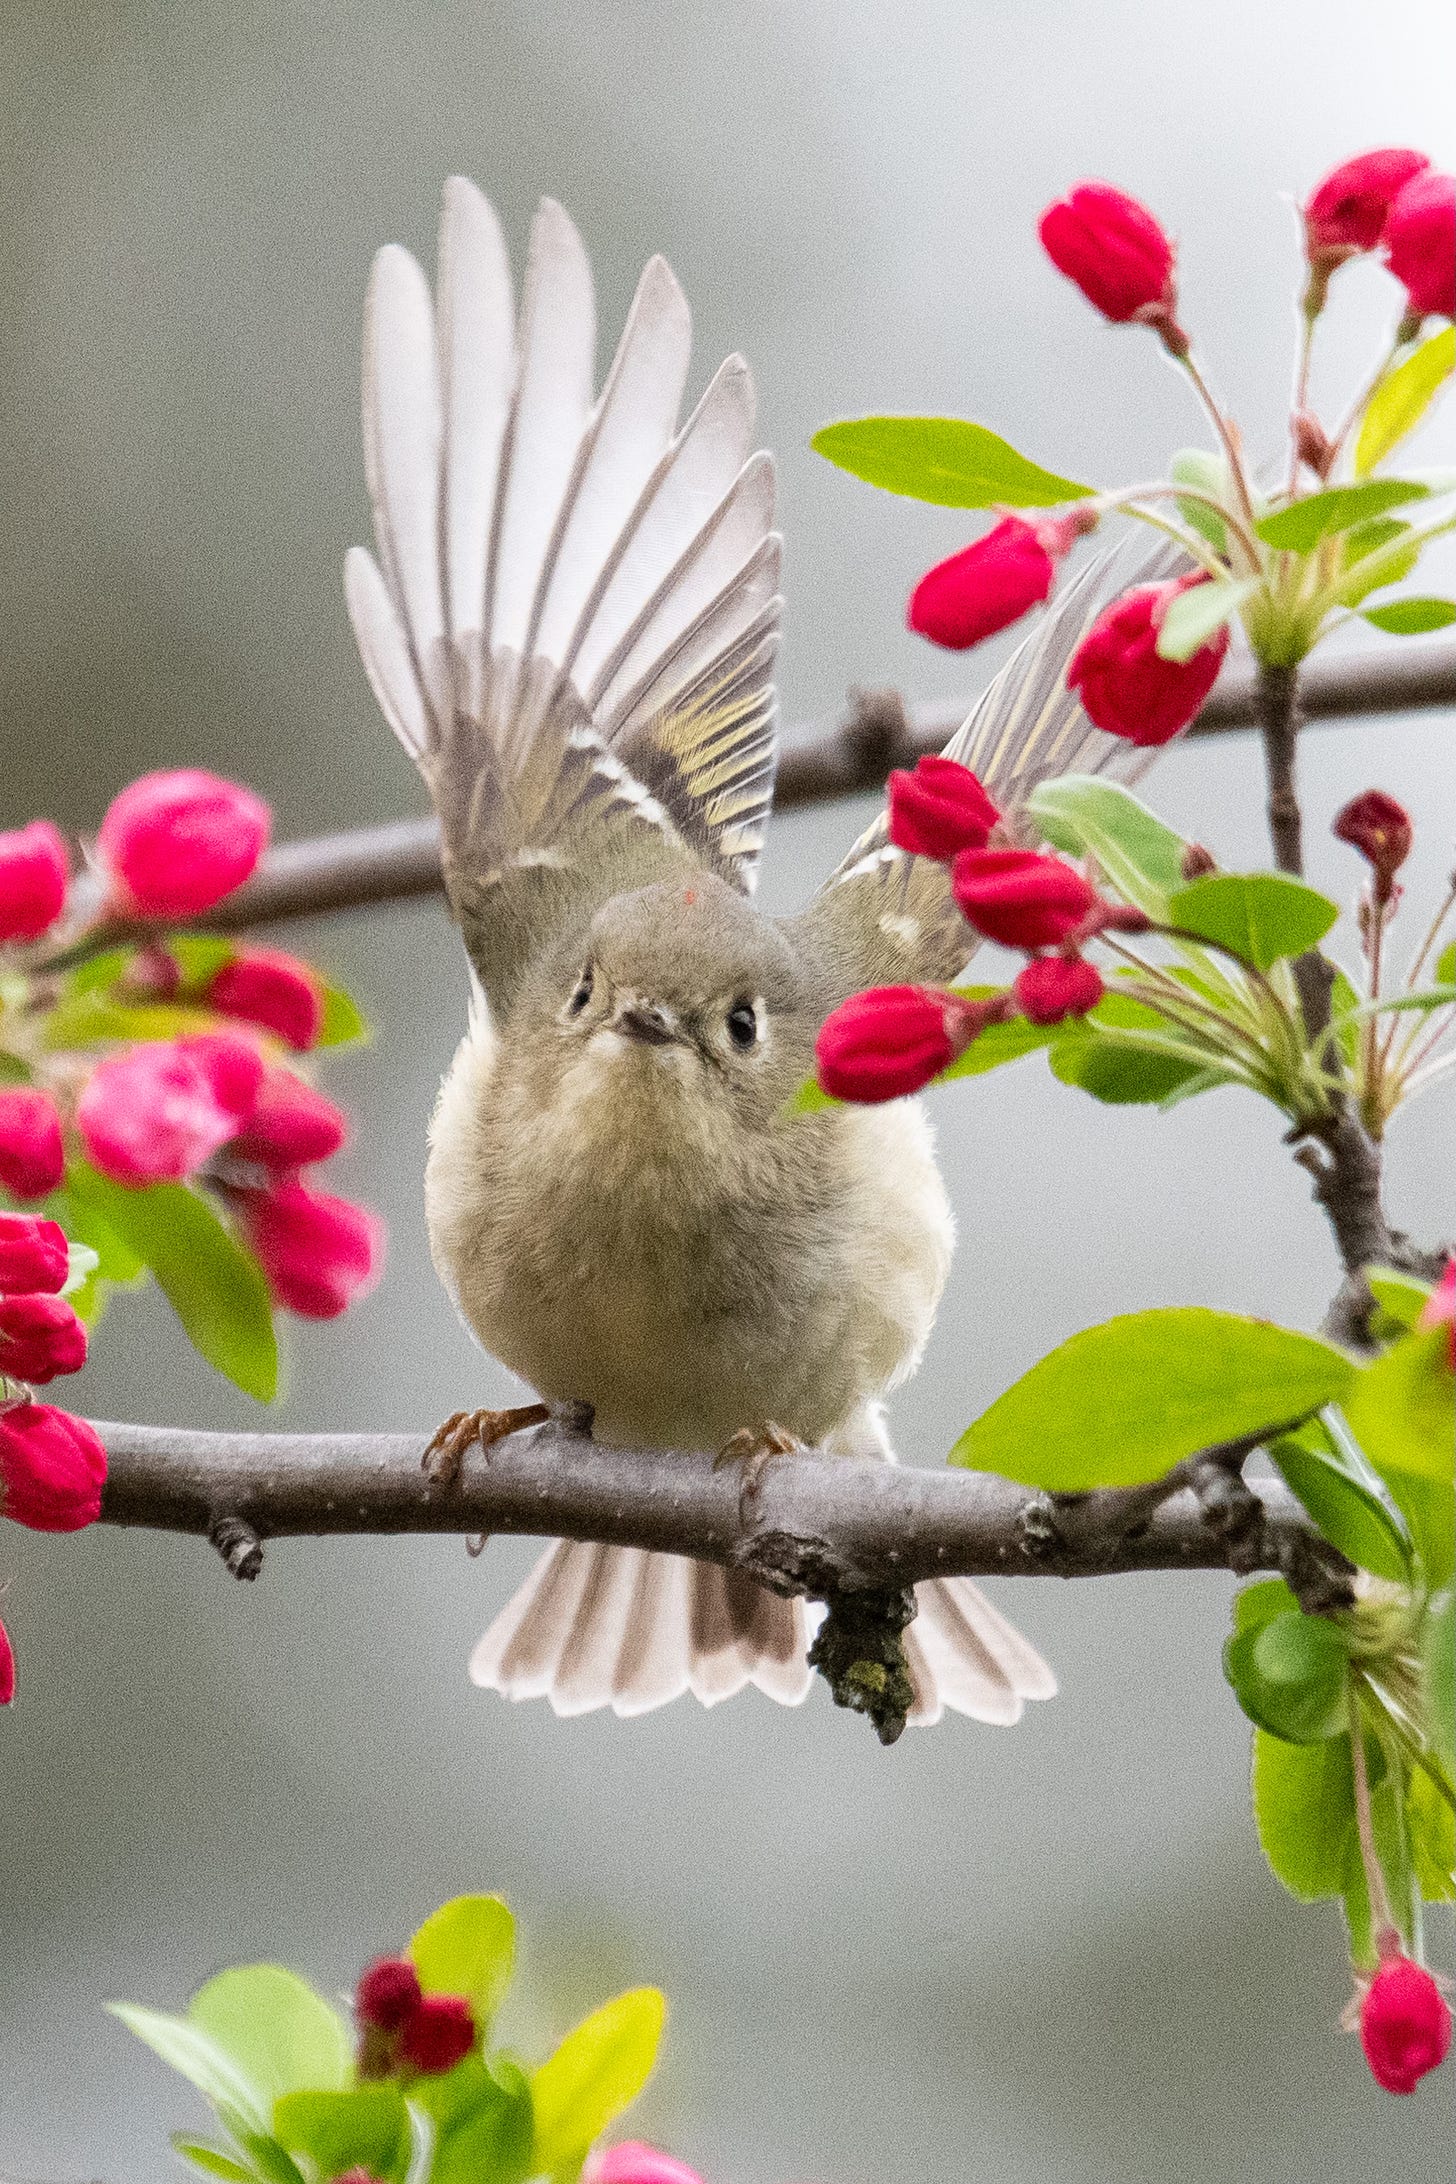 A very small greenish-brown bird with slightly goggly eyes, wings raised and tail spread, is about to launch into flight from a branch in a flowering crabapple tree